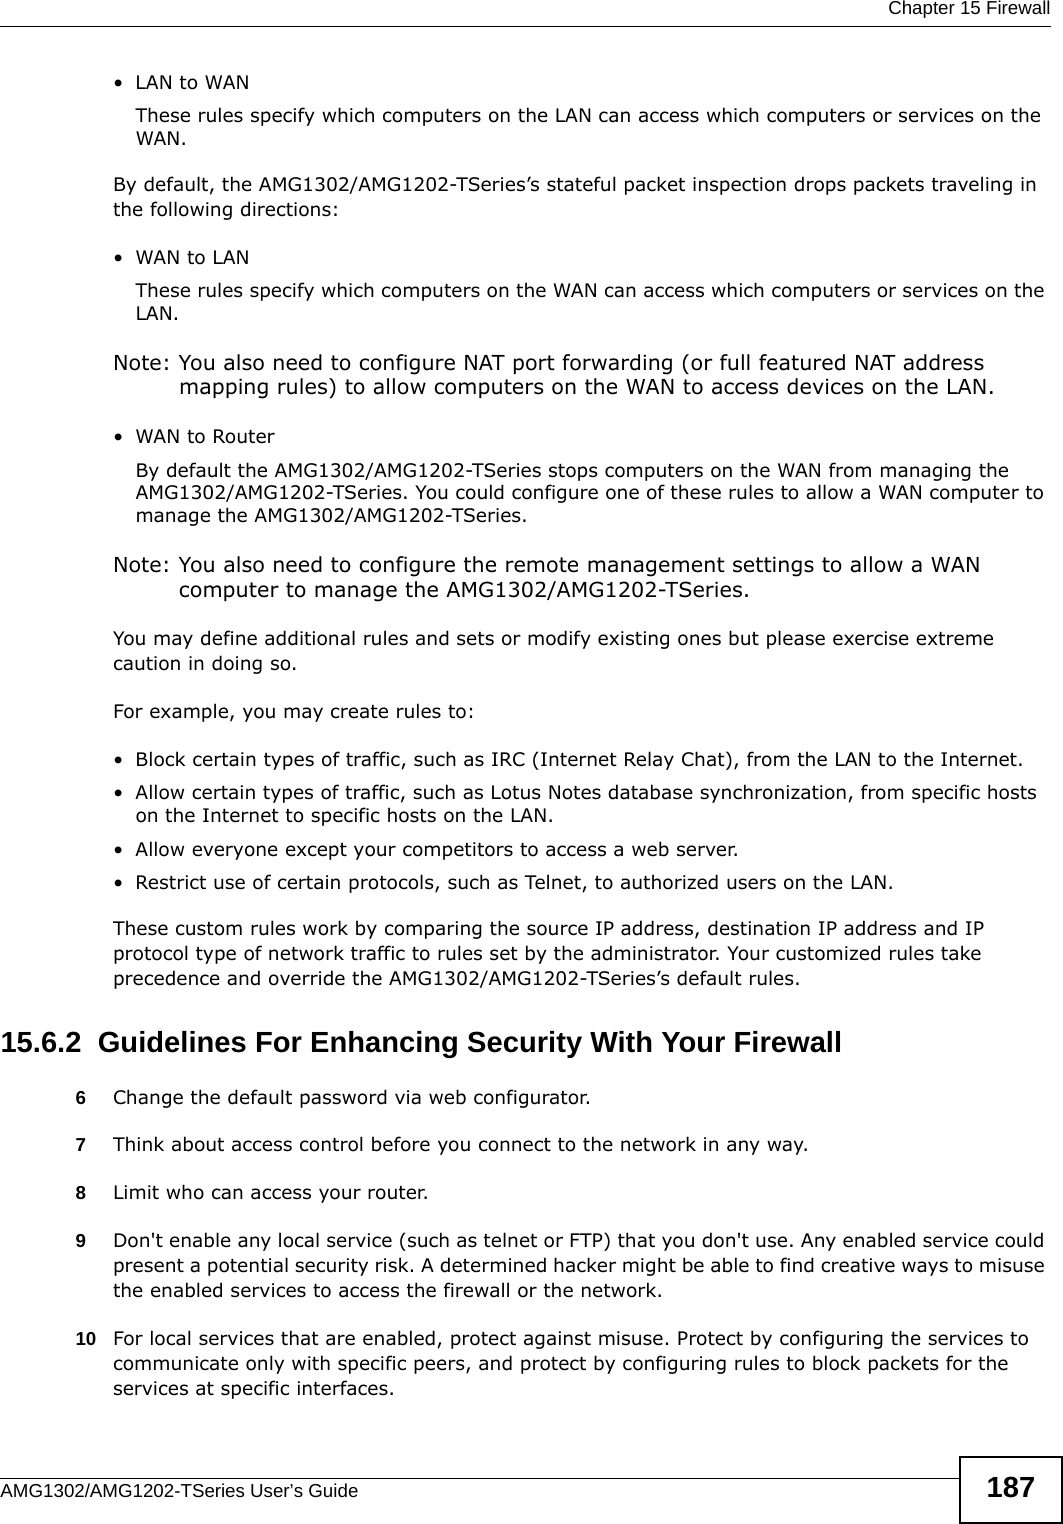  Chapter 15 FirewallAMG1302/AMG1202-TSeries User’s Guide 187•LAN to WANThese rules specify which computers on the LAN can access which computers or services on the WAN.By default, the AMG1302/AMG1202-TSeries’s stateful packet inspection drops packets traveling in the following directions:•WAN to LANThese rules specify which computers on the WAN can access which computers or services on the LAN. Note: You also need to configure NAT port forwarding (or full featured NAT address mapping rules) to allow computers on the WAN to access devices on the LAN.•WAN to RouterBy default the AMG1302/AMG1202-TSeries stops computers on the WAN from managing the AMG1302/AMG1202-TSeries. You could configure one of these rules to allow a WAN computer to manage the AMG1302/AMG1202-TSeries.Note: You also need to configure the remote management settings to allow a WAN computer to manage the AMG1302/AMG1202-TSeries.You may define additional rules and sets or modify existing ones but please exercise extreme caution in doing so.For example, you may create rules to:• Block certain types of traffic, such as IRC (Internet Relay Chat), from the LAN to the Internet.• Allow certain types of traffic, such as Lotus Notes database synchronization, from specific hosts on the Internet to specific hosts on the LAN.• Allow everyone except your competitors to access a web server.• Restrict use of certain protocols, such as Telnet, to authorized users on the LAN.These custom rules work by comparing the source IP address, destination IP address and IP protocol type of network traffic to rules set by the administrator. Your customized rules take precedence and override the AMG1302/AMG1202-TSeries’s default rules. 15.6.2  Guidelines For Enhancing Security With Your Firewall6Change the default password via web configurator.7Think about access control before you connect to the network in any way.8Limit who can access your router.9Don&apos;t enable any local service (such as telnet or FTP) that you don&apos;t use. Any enabled service could present a potential security risk. A determined hacker might be able to find creative ways to misuse the enabled services to access the firewall or the network.10 For local services that are enabled, protect against misuse. Protect by configuring the services to communicate only with specific peers, and protect by configuring rules to block packets for the services at specific interfaces.